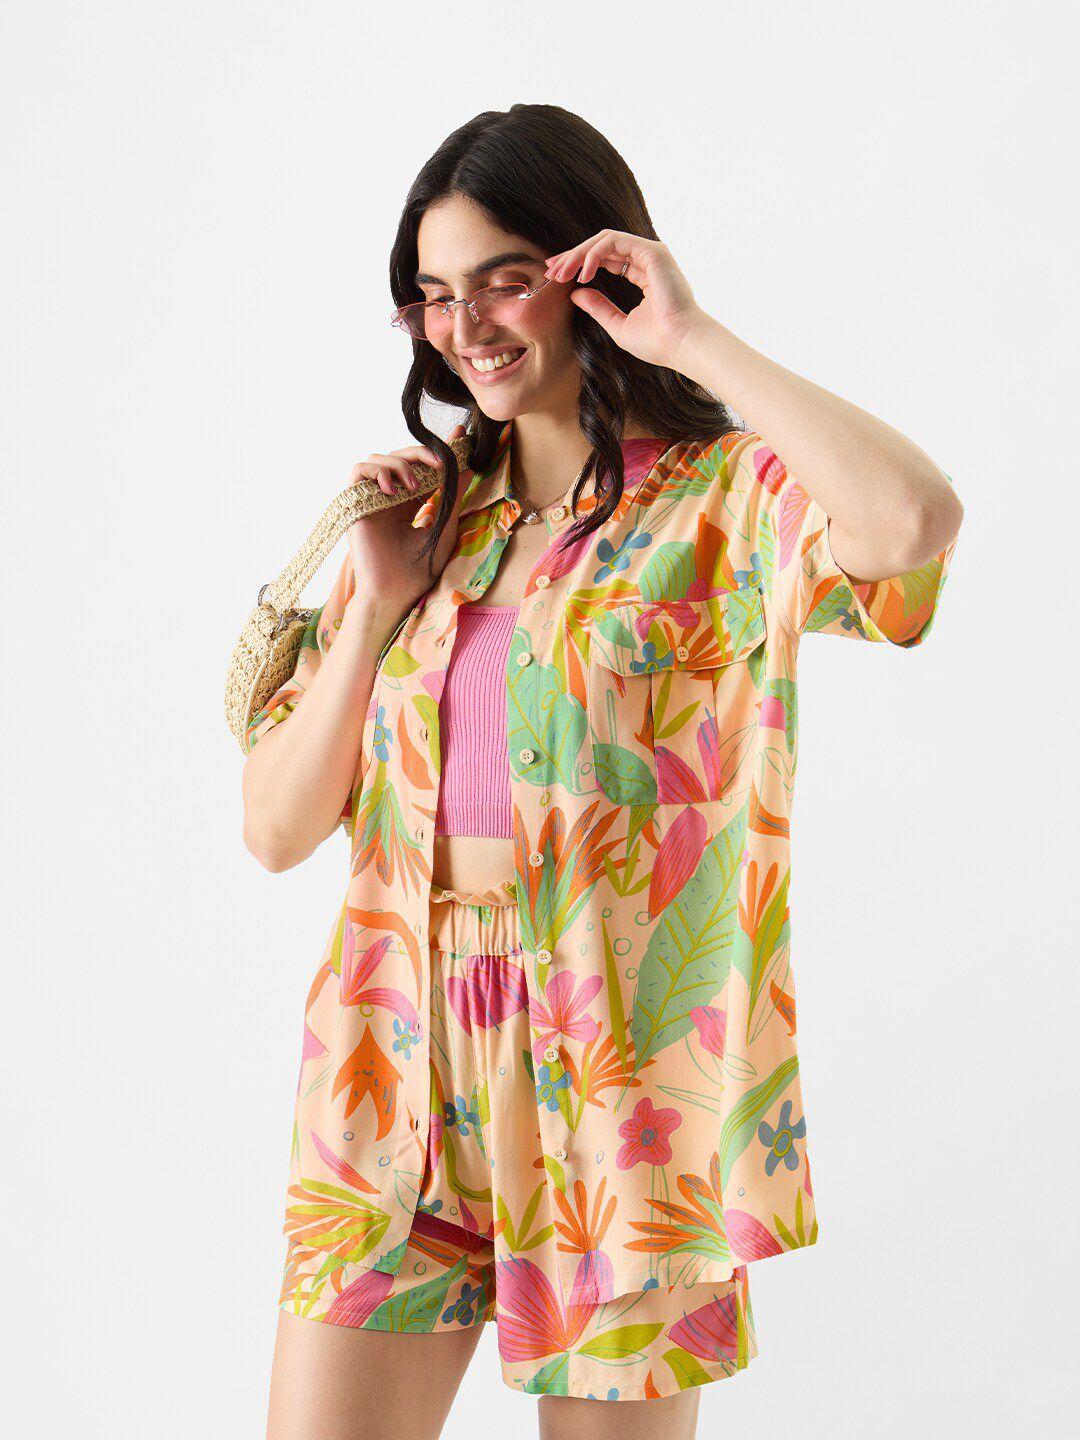 the souled store peach-coloured floral-printed shirt with shorts co-ords